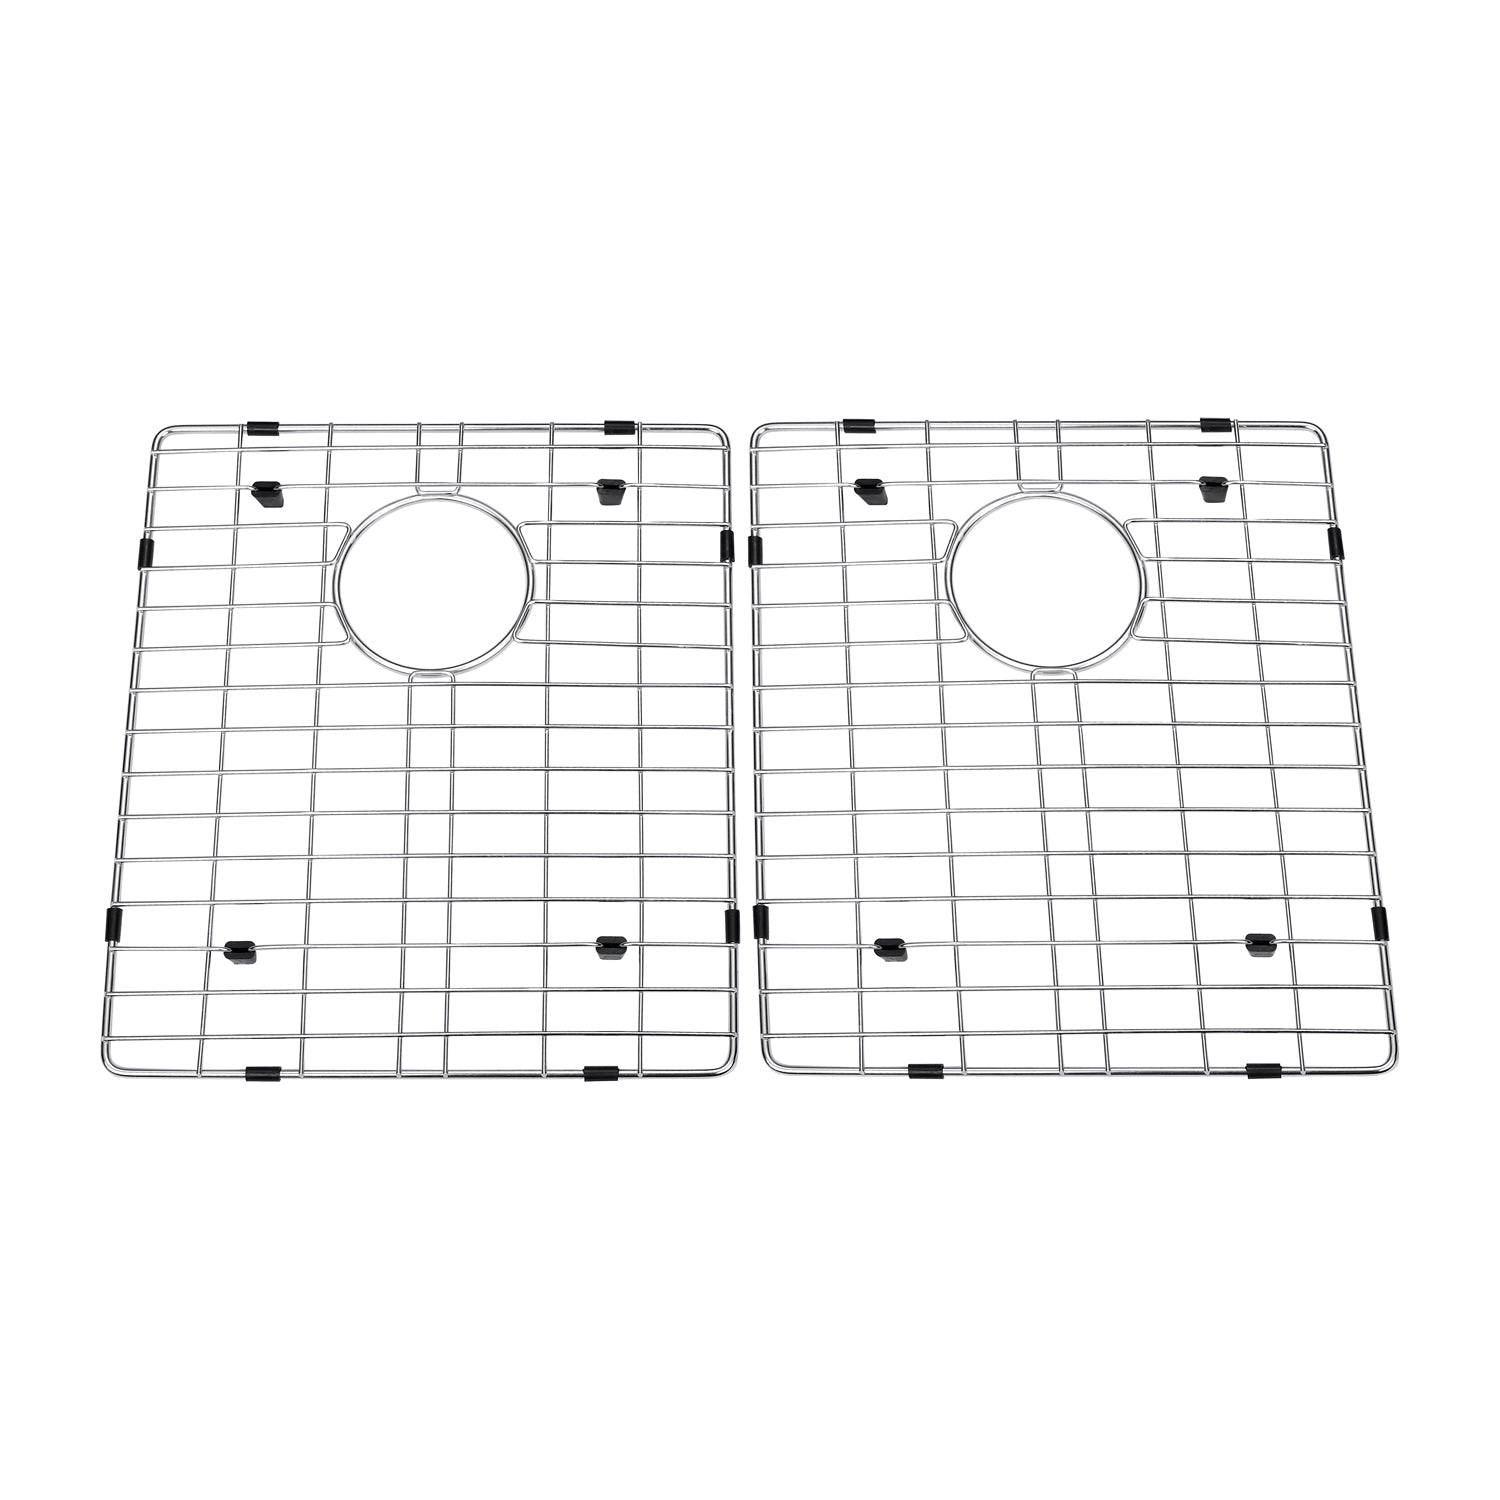 DAX Grid for Kitchen Sink, Stainless Steel Body, Chrome Finish, Compatible with DAX-SQ-2920A, 17-3/4 x 13 Inches (GRID-SQ2920A)